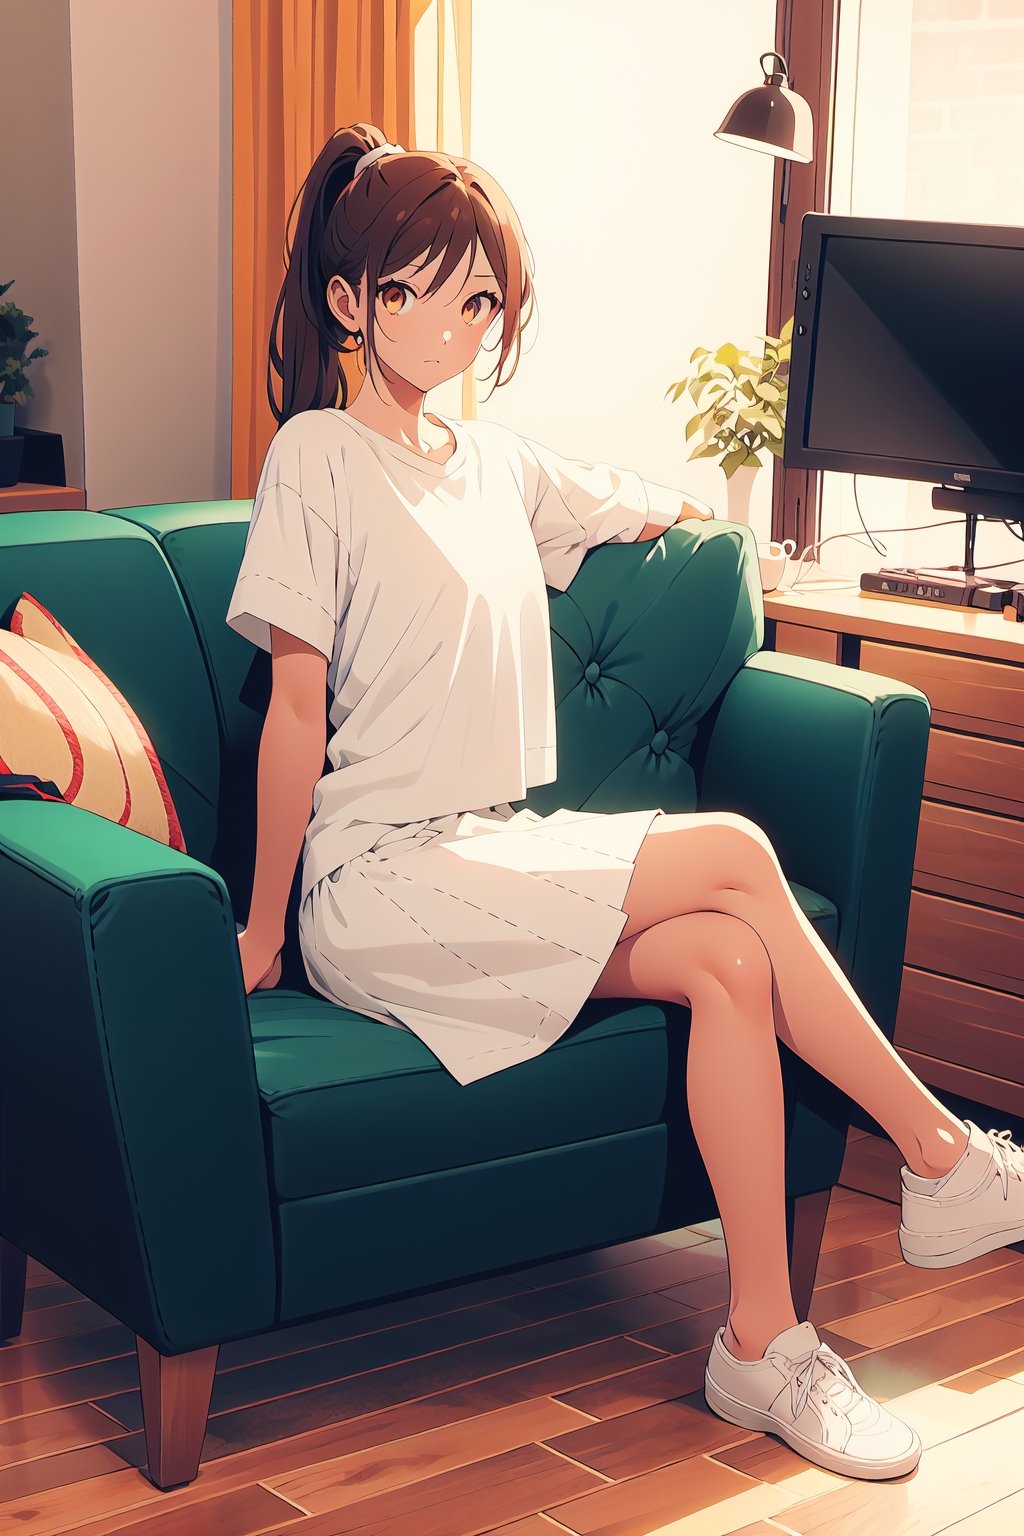 1girl,25 years old,ponytail,brown eyes,brown hair,portrait, white sportswear,white t-shirt, vintage skirt,big thights,crossed legs,illustration,fcloseup,rgbcolor, full_body, sitting, vintage sofa,front view, looking_at_viewer, smug look,photostudio,emotion,body looking forward, midnight